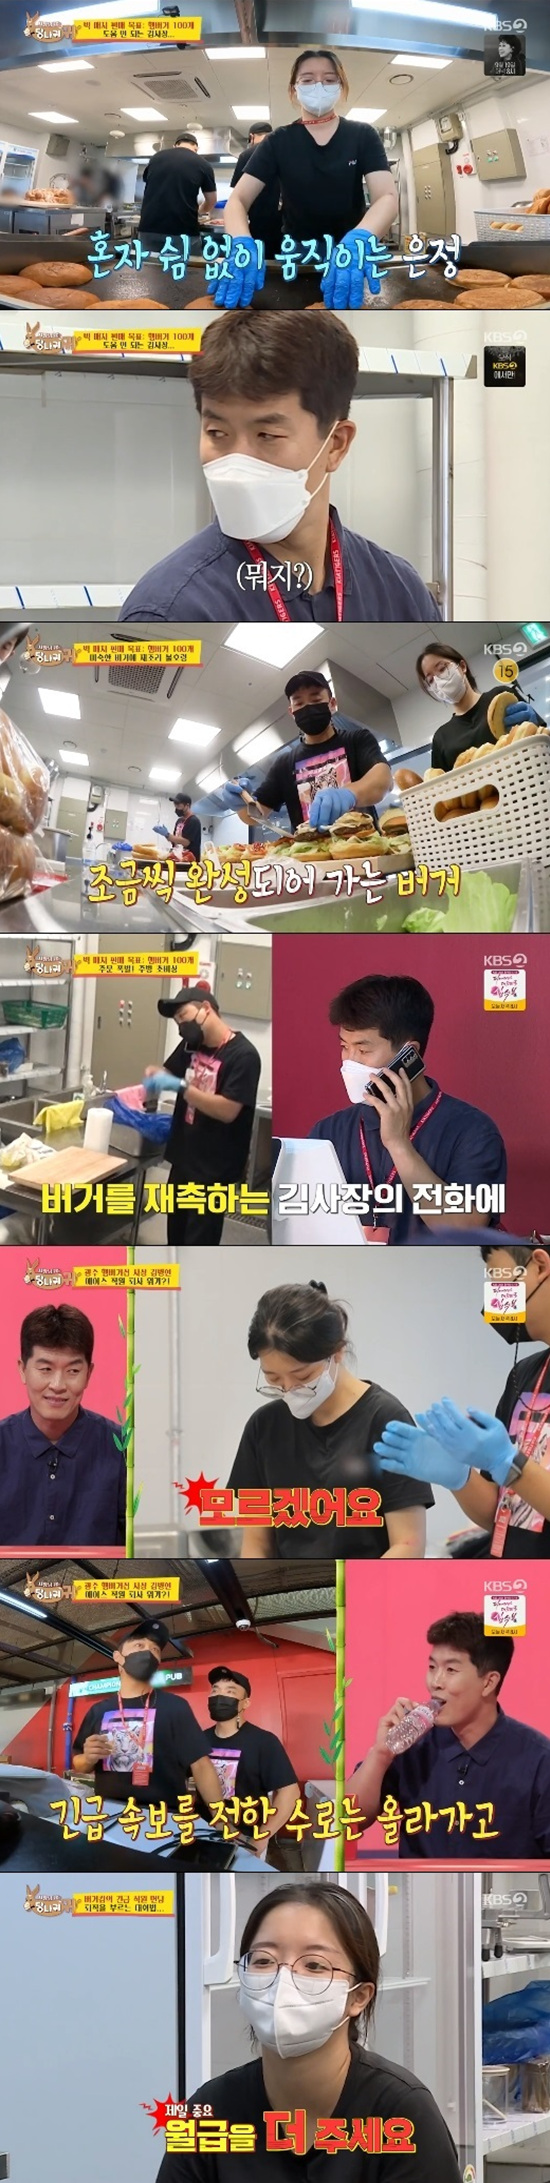 On KBS 2TV Boss in the Mirror broadcast on the 19th, Kim Byung-hyun was asked to raise his salary.Kim Byung-hyun went to work on the day, expecting good sales ahead of the weekend games of Kia and Kiwoom.Kim Byung-hyun expressed his expectation for sales by telling his direct One that he had a good dream.Kim Byung-hyun, who looked in good spirits, was uncomfortable to plant when Kim Eun-jung direct One was not seen.Kim Eun-jung, who had just arrived, said it was late to make the bread that Kim Byung-hyun had already talked about.Kim Byung-hyun was angry at the answer of Kim Eun-jung, who seemed to be something blunt.Kim Eun-jung was also unhappy because he had to make bread alone.With a chilly atmosphere between Kim Byung-hyun and Kim Eun-jung Direct One, the direct Ones were keen to make 100 Hamburger.In the meantime, orders began to rush into Kim Byung-hyuns Hamburger store as the crowd began to take a stand.You watch the broadcast and you find more, Kim Byung-hyun said.Kim Byung-hyun goes up to the fourth floor and does not cook when the waiting line does not decrease, but while baking patty himself, Kim Eun-jung directs to One, Do not put bread under the air conditioner and leave it somewhere else.The bread cools down quickly, he said.Kim Eun-jung One said, I am in one place when I asked another person to come from somewhere while I was busy all day and was in a difficult time.When asked if he would like to go that way, Kim Eun-jung direct One said: I dont know.A capable one should be nice, Jun Hyun-moo told the studio.Kim Byung-hyun, while he was finishing the Hamburger and counting the receipt, said one person, I think Mr. Eun-jung will quit.I think you should interview him. Kim Byung-hyun said, Suddenly, I thought, Why? Kim Byung-hyun began an interview with Kim Eun-jung, who said, Is it to make bread?I think Im the busiest person to make a Hamburger. Kim Byung-hyun mentioned two other directs, Then the line is a problem and the waterway is a problem.Jun Hyun-moo said, I have to pick more jobs. It is a problem that I lack one.Kim Eun-jung, one, asked me not to talk about baseball to him, and added, Give me more monthly salary.Kim Byung-hyun wanted to put a zombie eye on the salary increase story and said, Ill think about it.Kim Eun-jung, one of the direct, said, I will not say stop for a while.Photo: KBS Broadcasting Screen